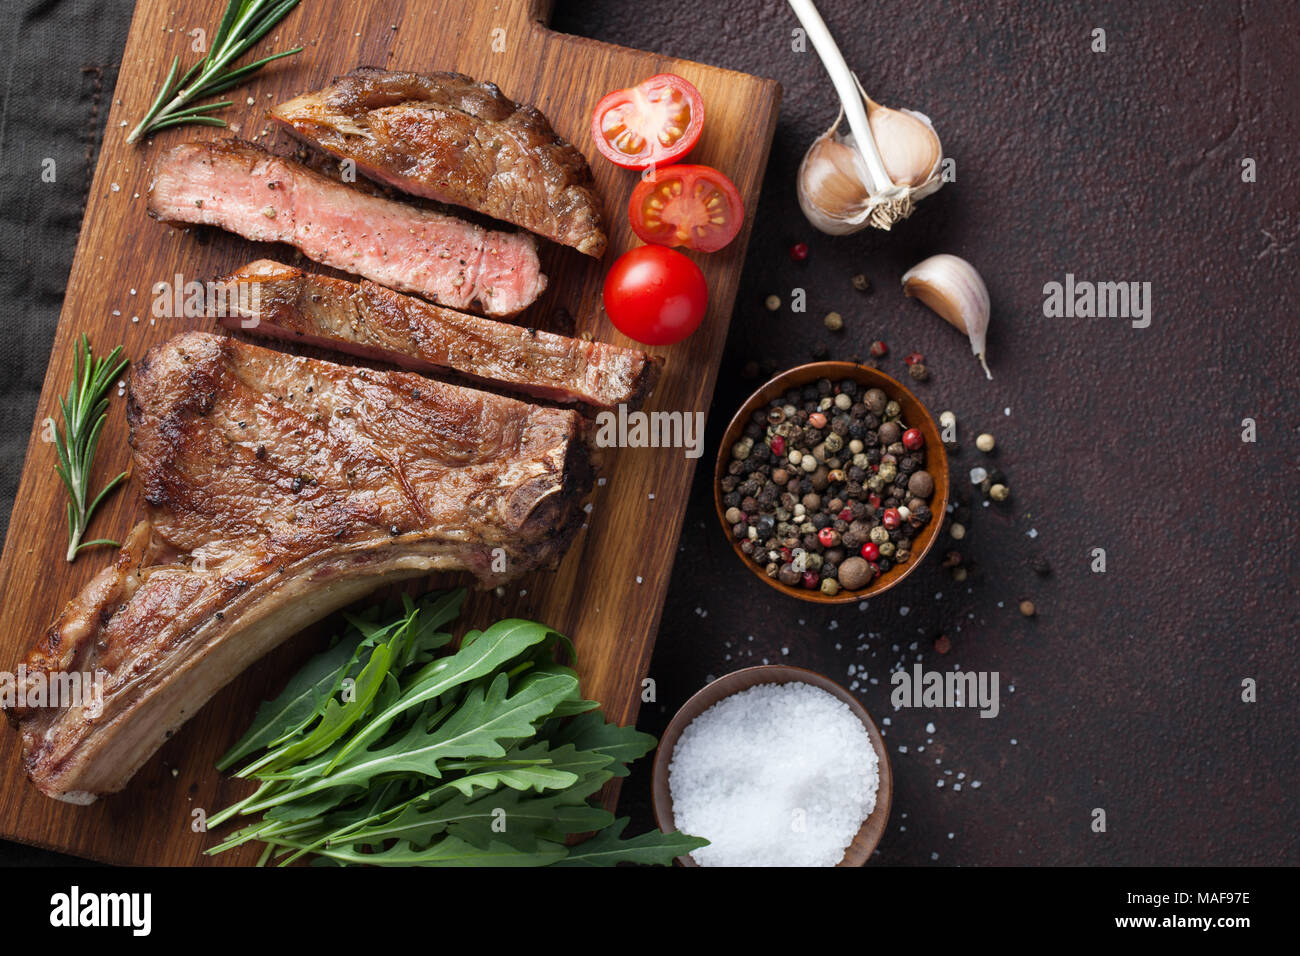 Grilled cowboy beef steak, herbs and spices on a dark stone background. Top view with copy space for your text. Stock Photo